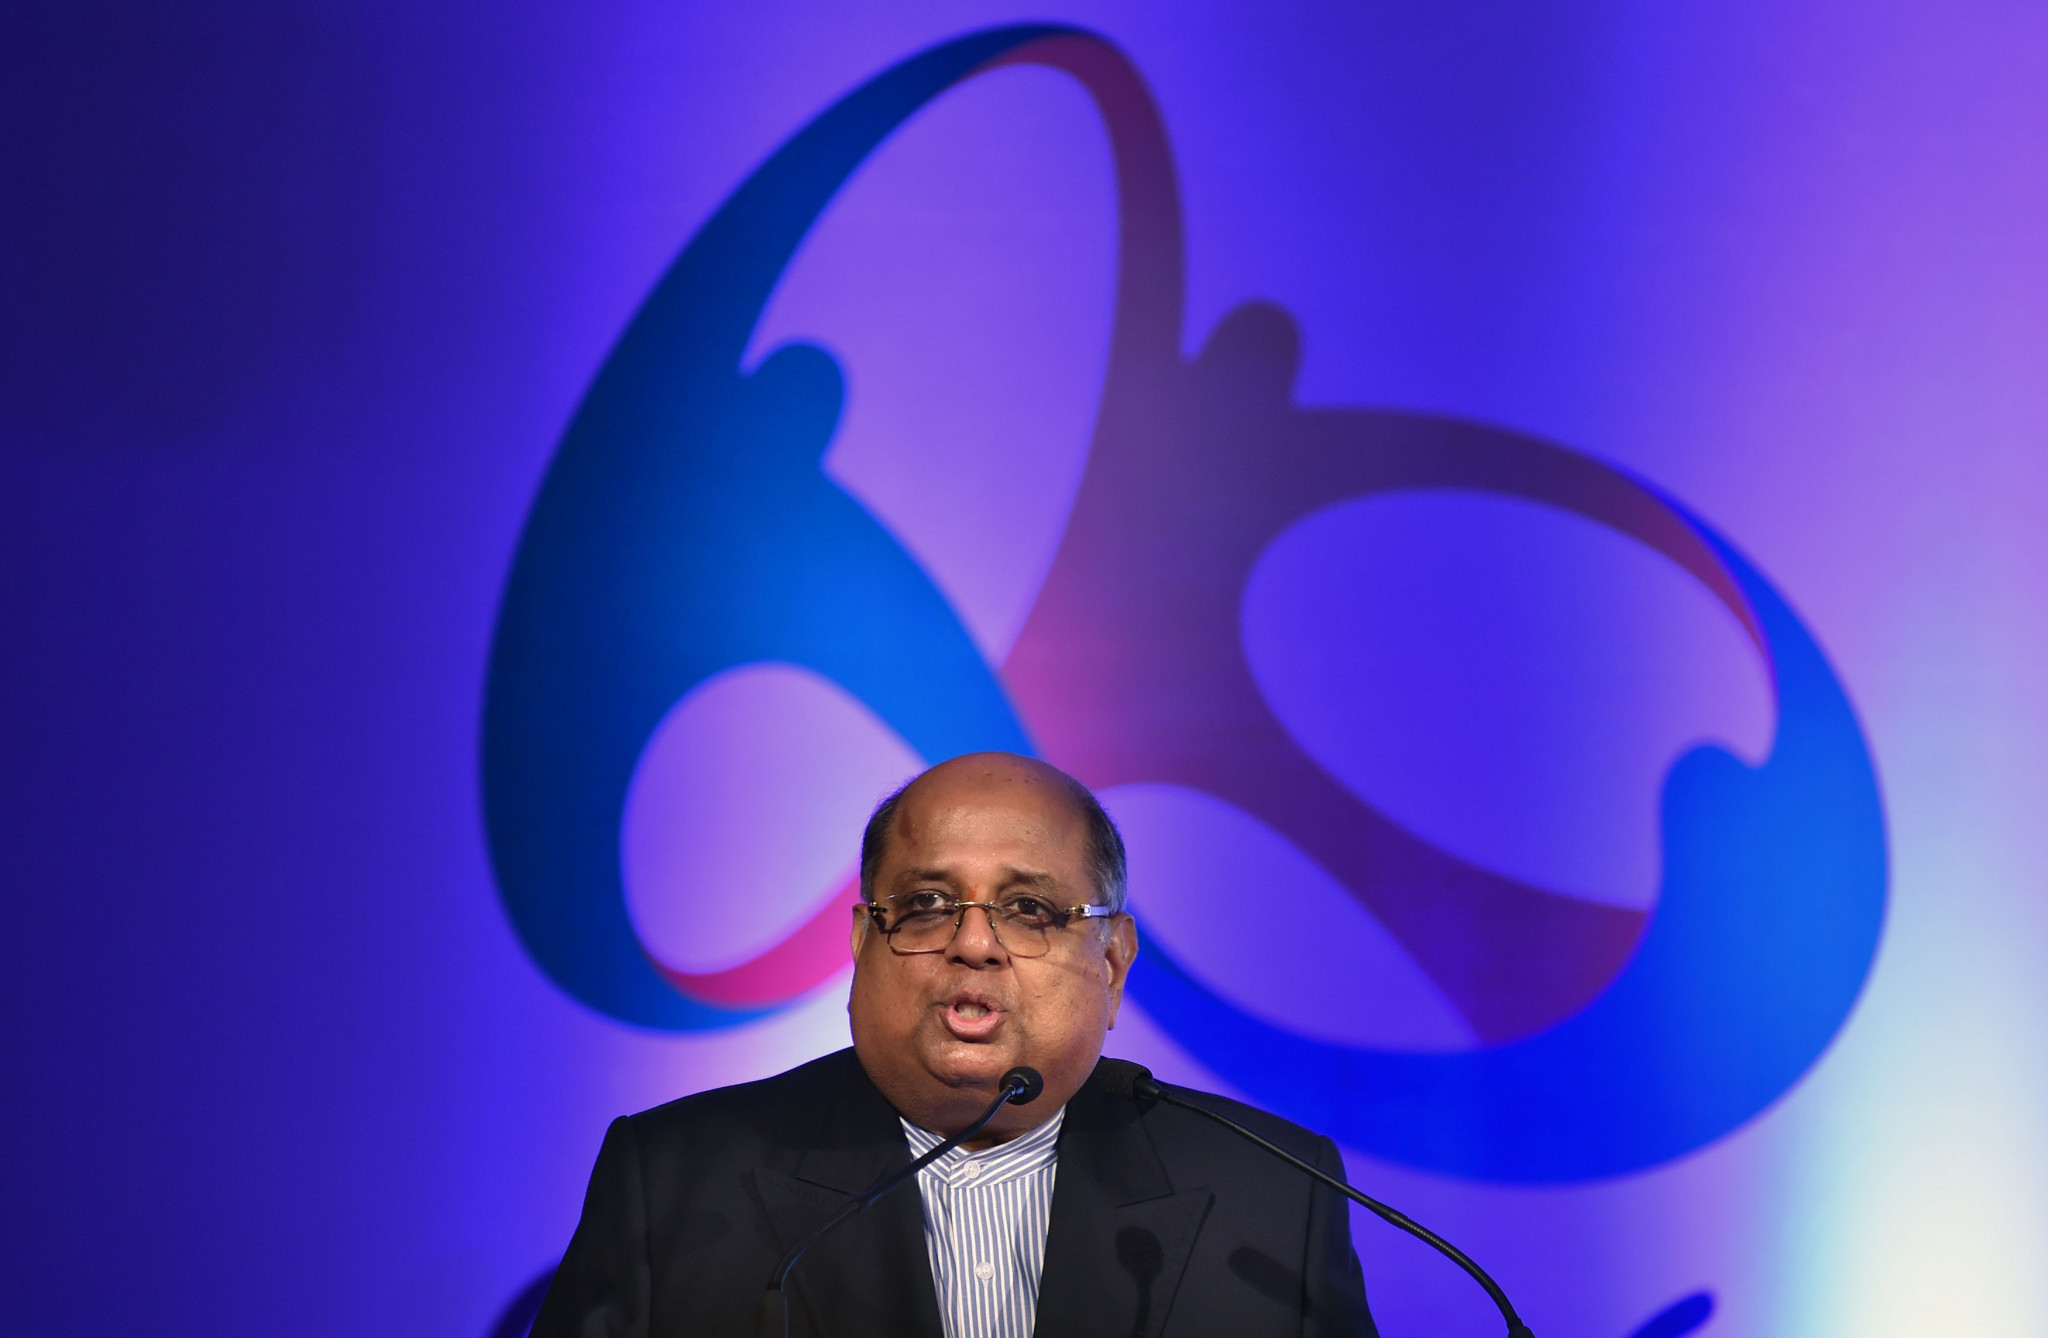 Ramachandran yet to confirm bid to remain as Indian Olympic Association President